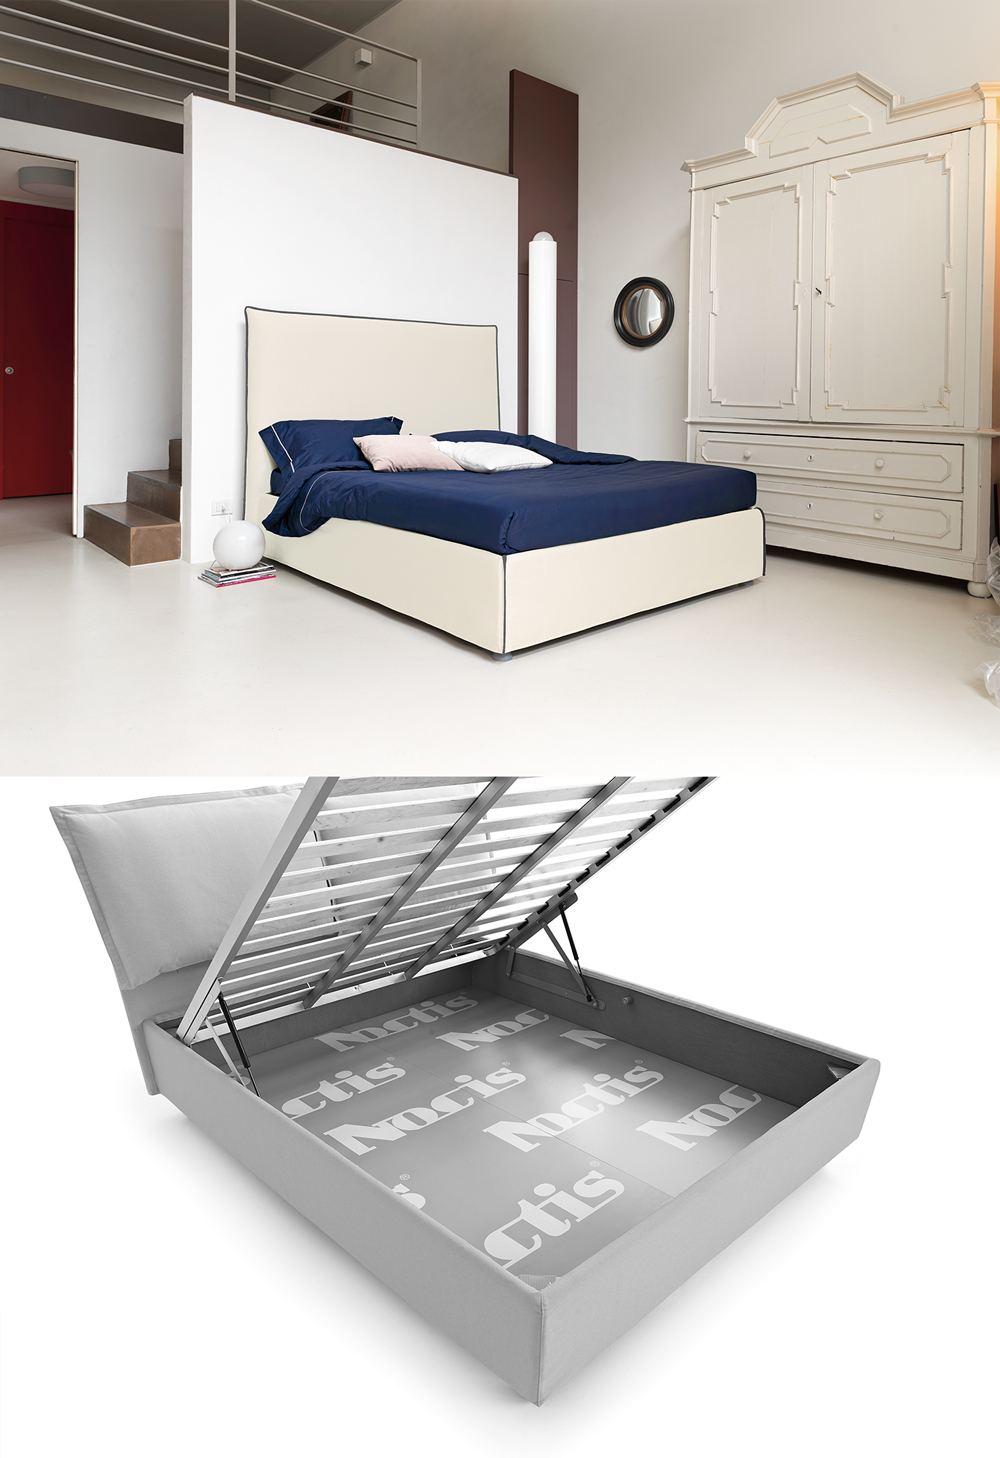 Made in Italy
BED-16